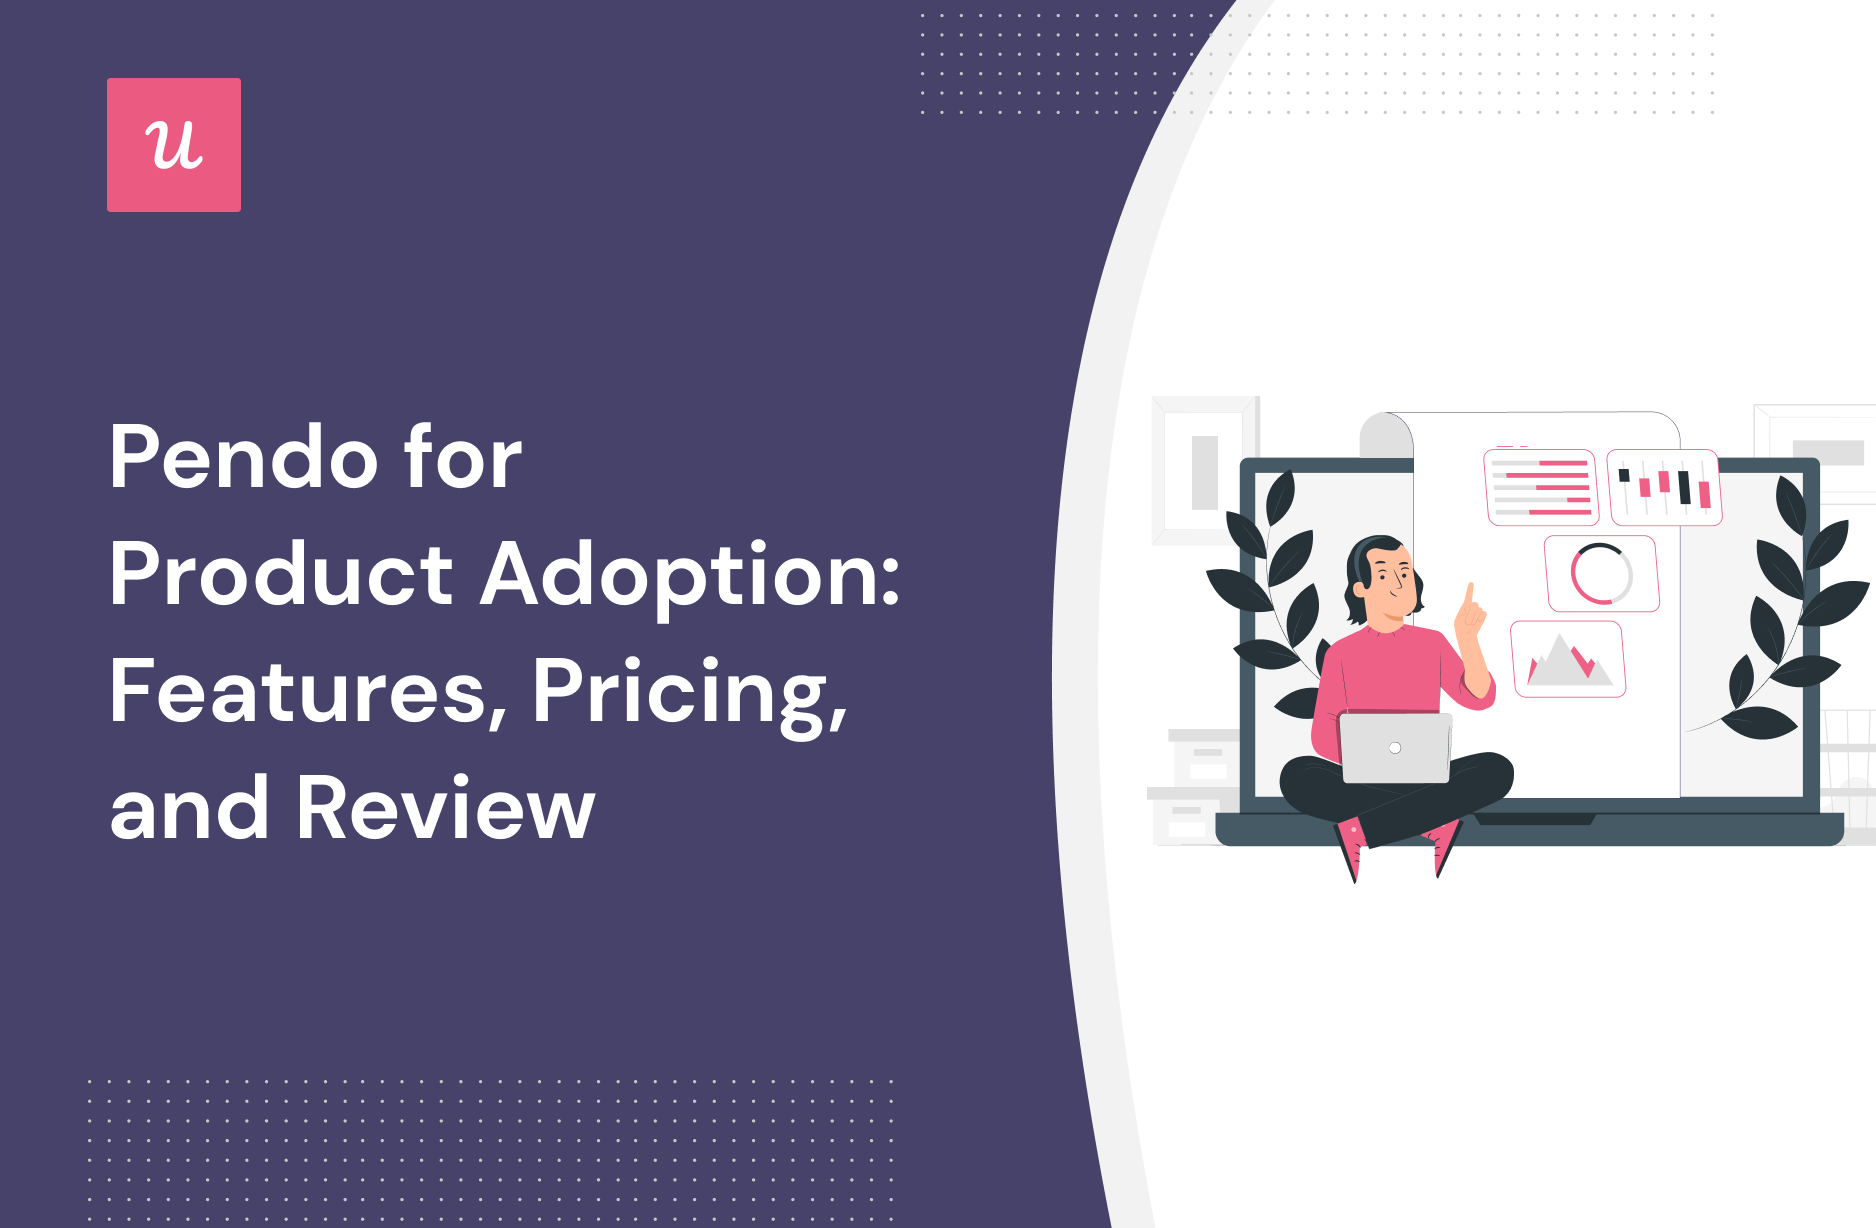 Pendo for Product Adoption: Features, Pricing, and Review